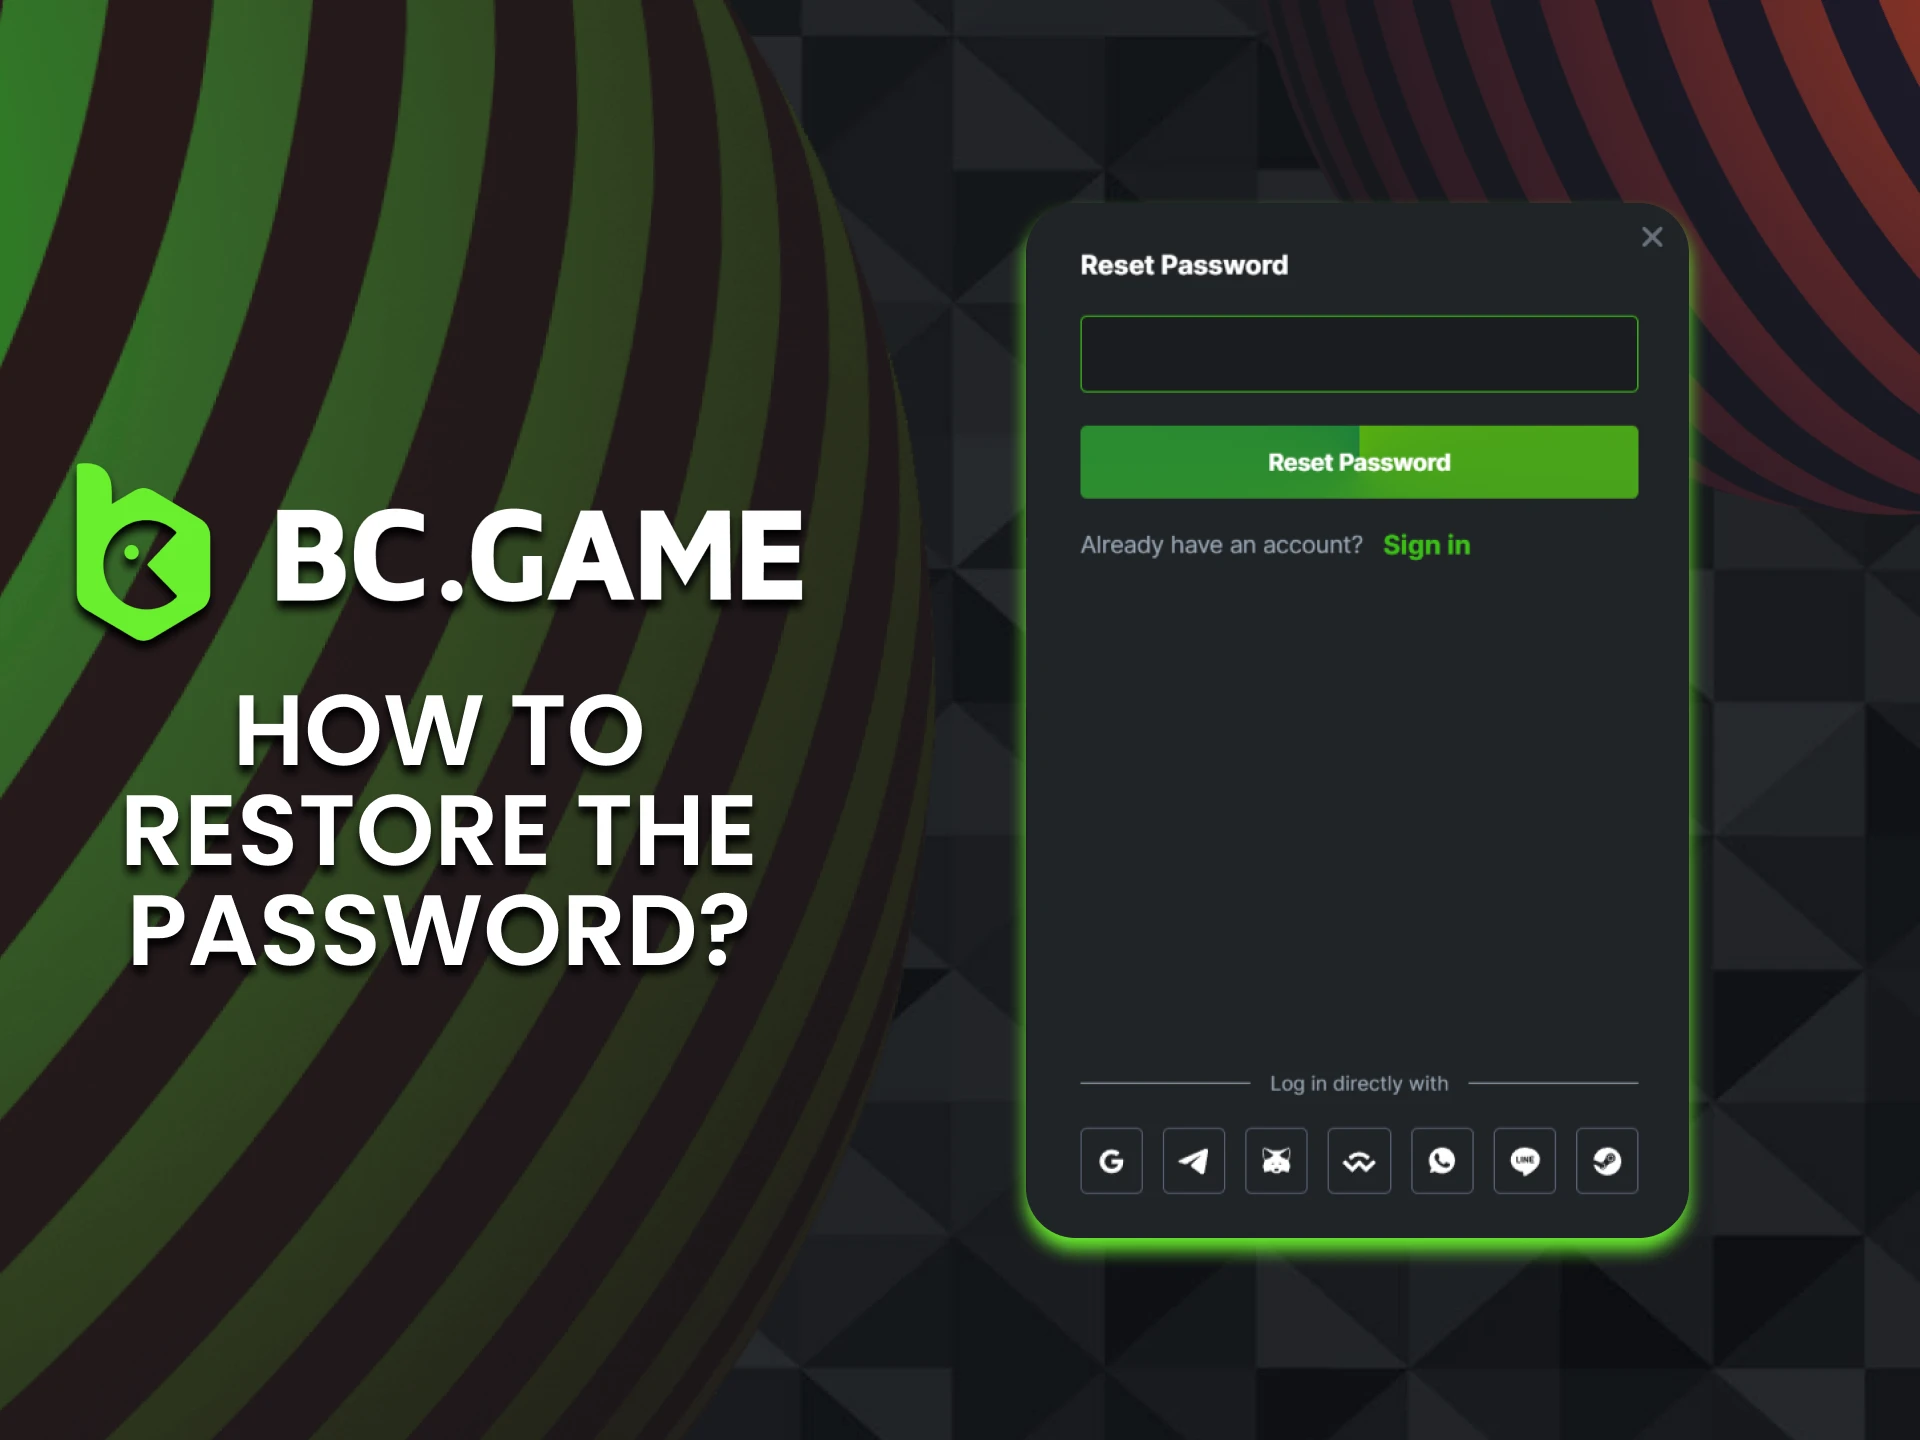 Click on the forgot password button to restore the password of your BC Game account.